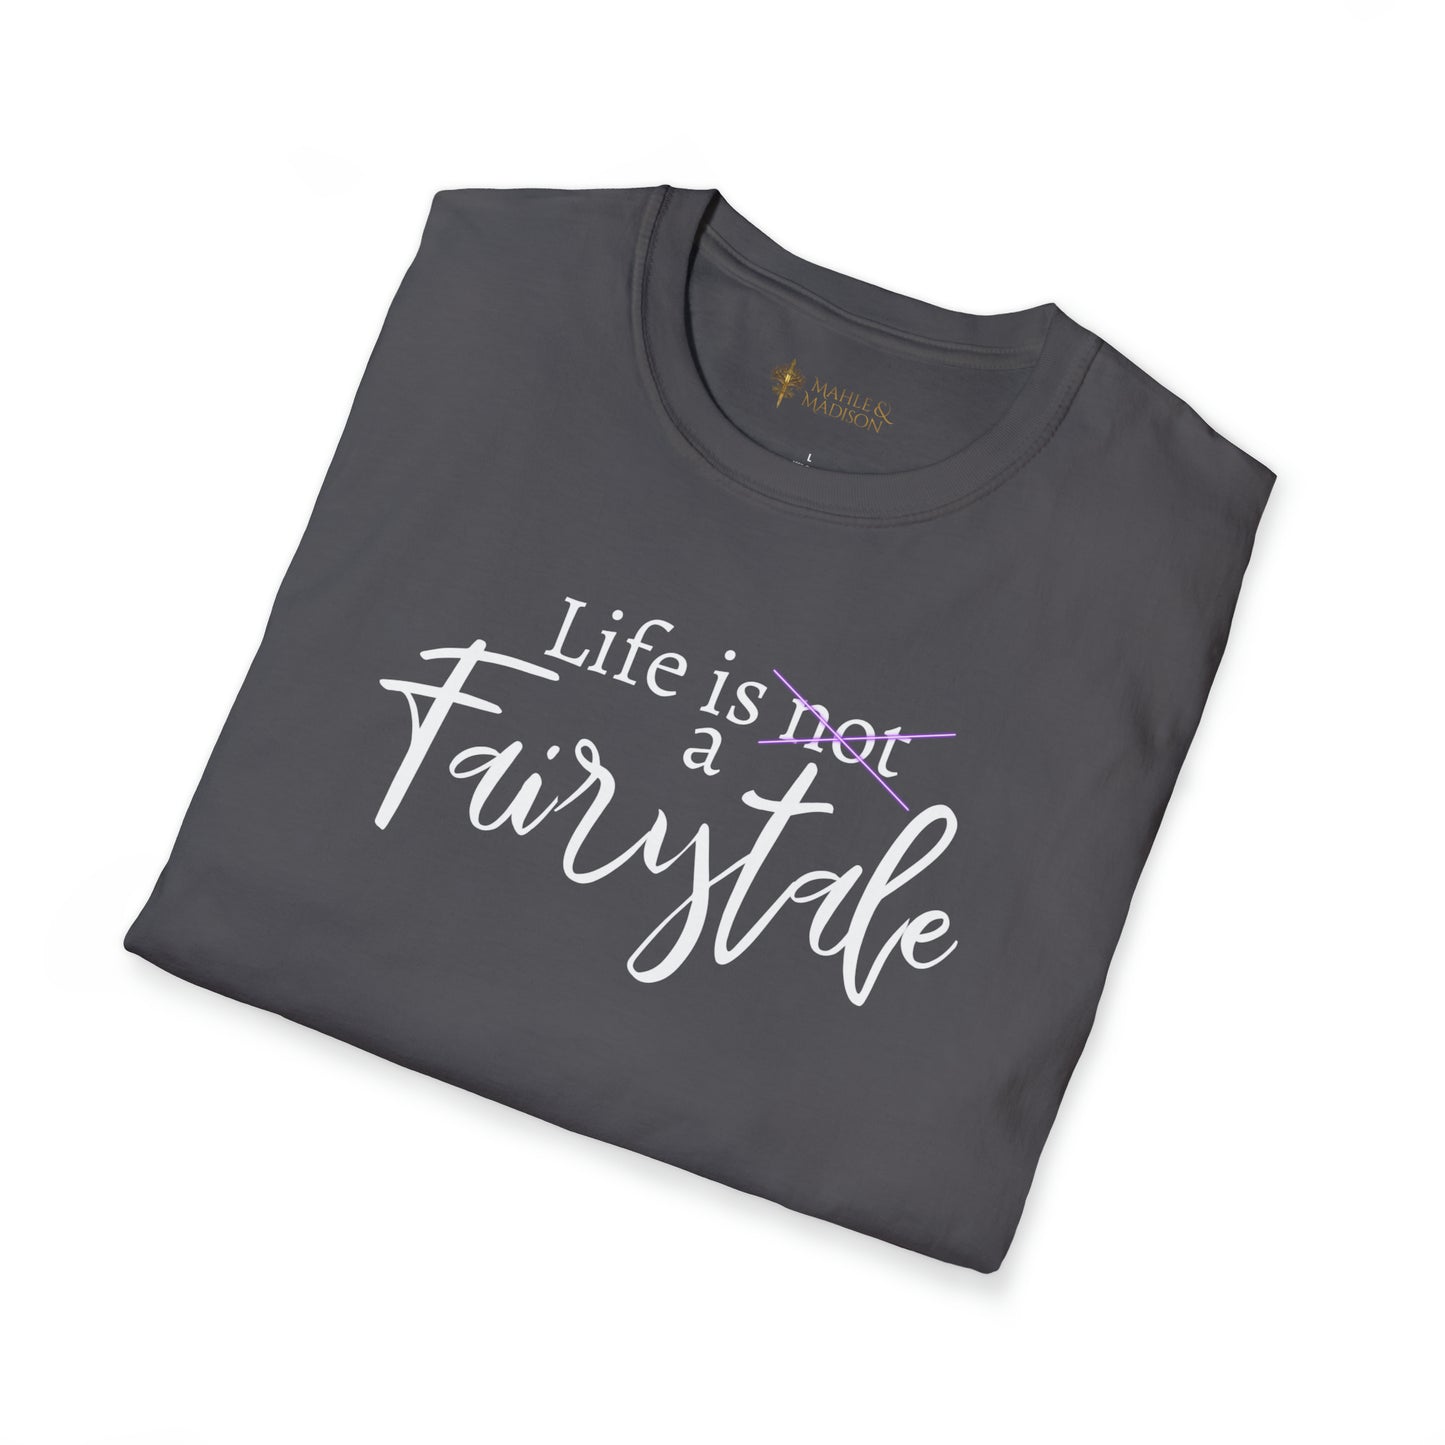 Life is a Fairytale Softstyle T-Shirt